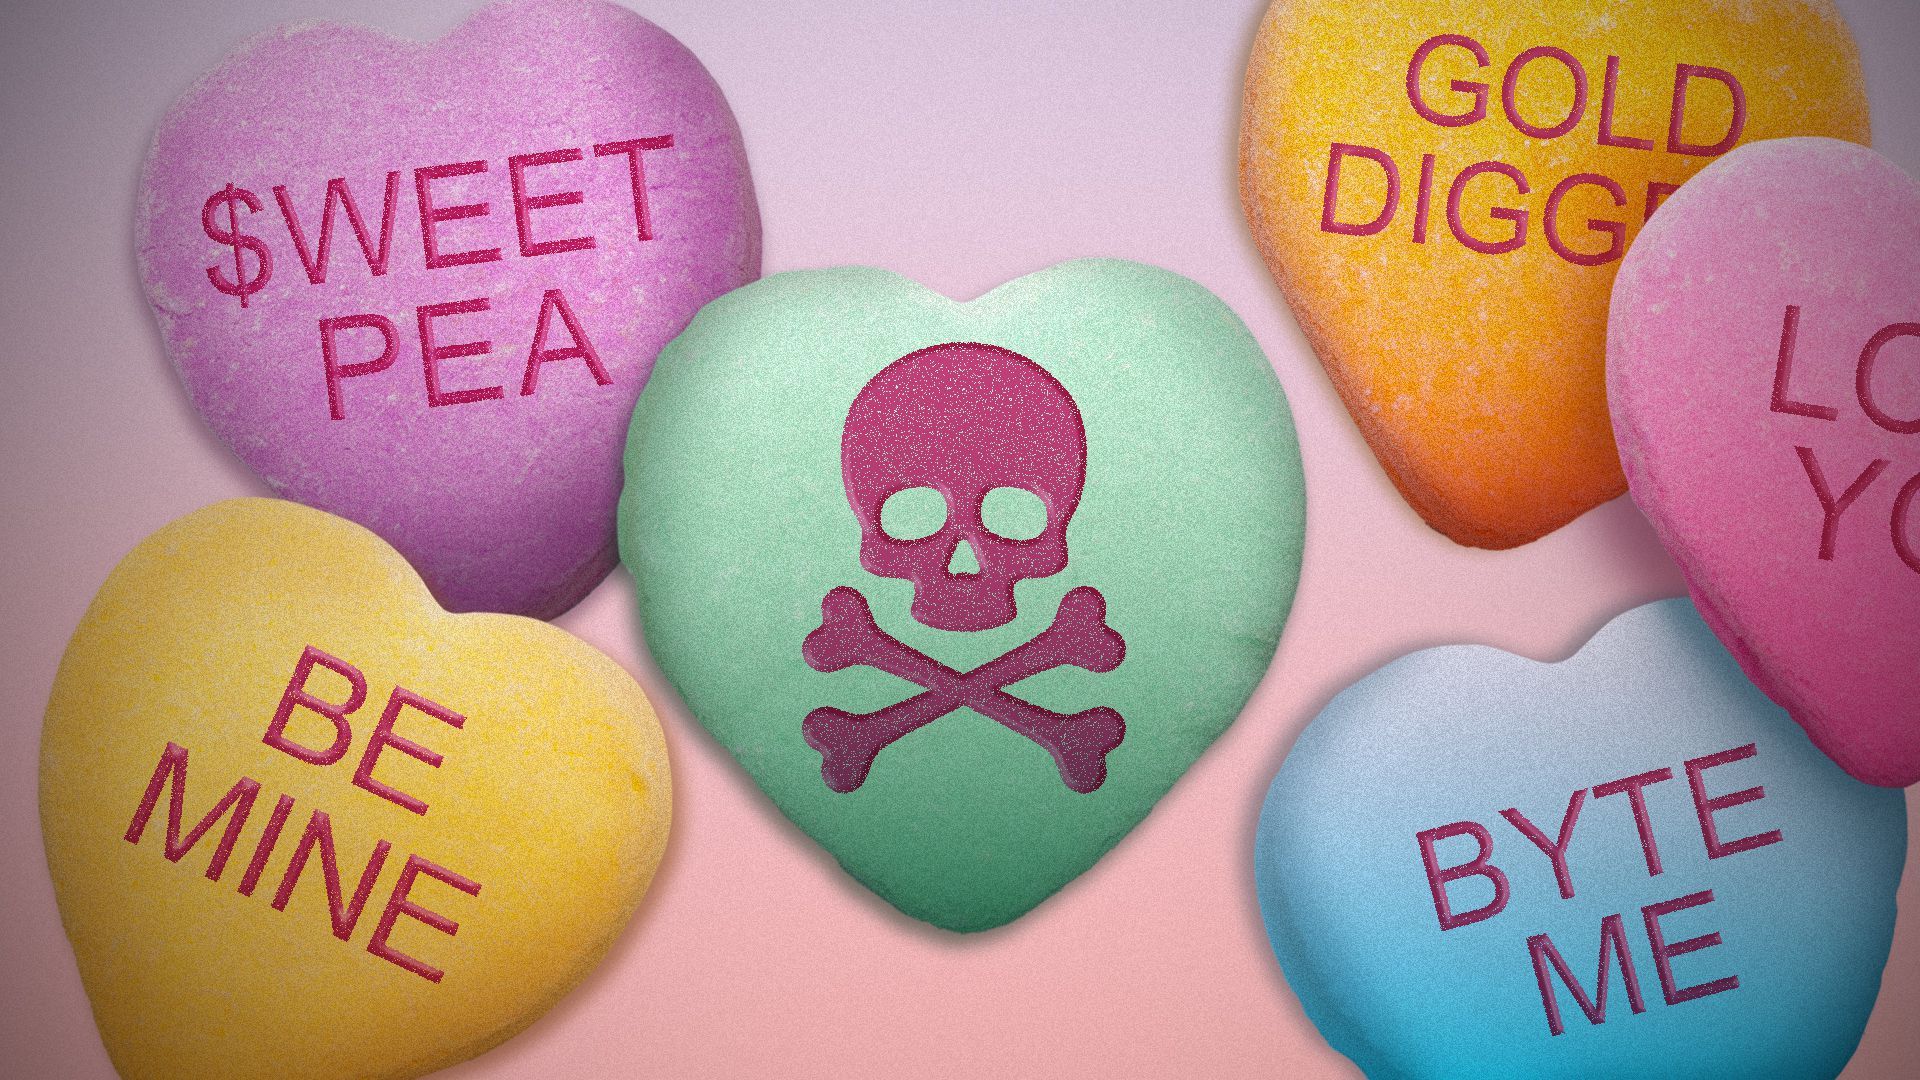 Illustration of sweet hearts candy with a skull and crossbones, "Byte Me", "$weet Pea", "Gold Digger", "Be Mine" and "Love You" written on them.